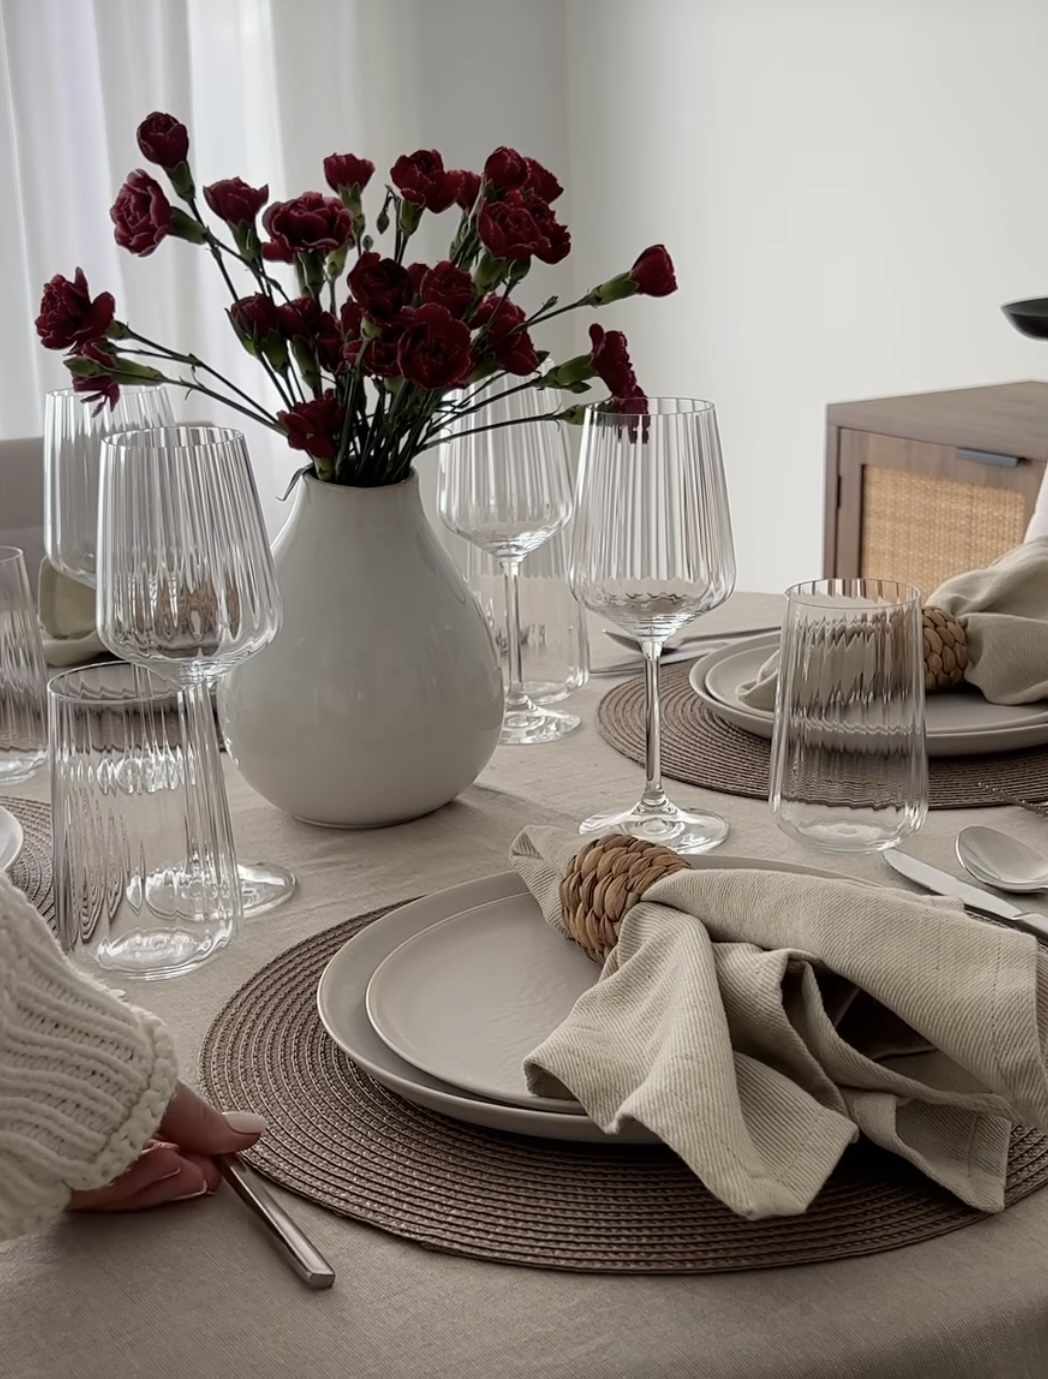 Tableware from Linen Chest